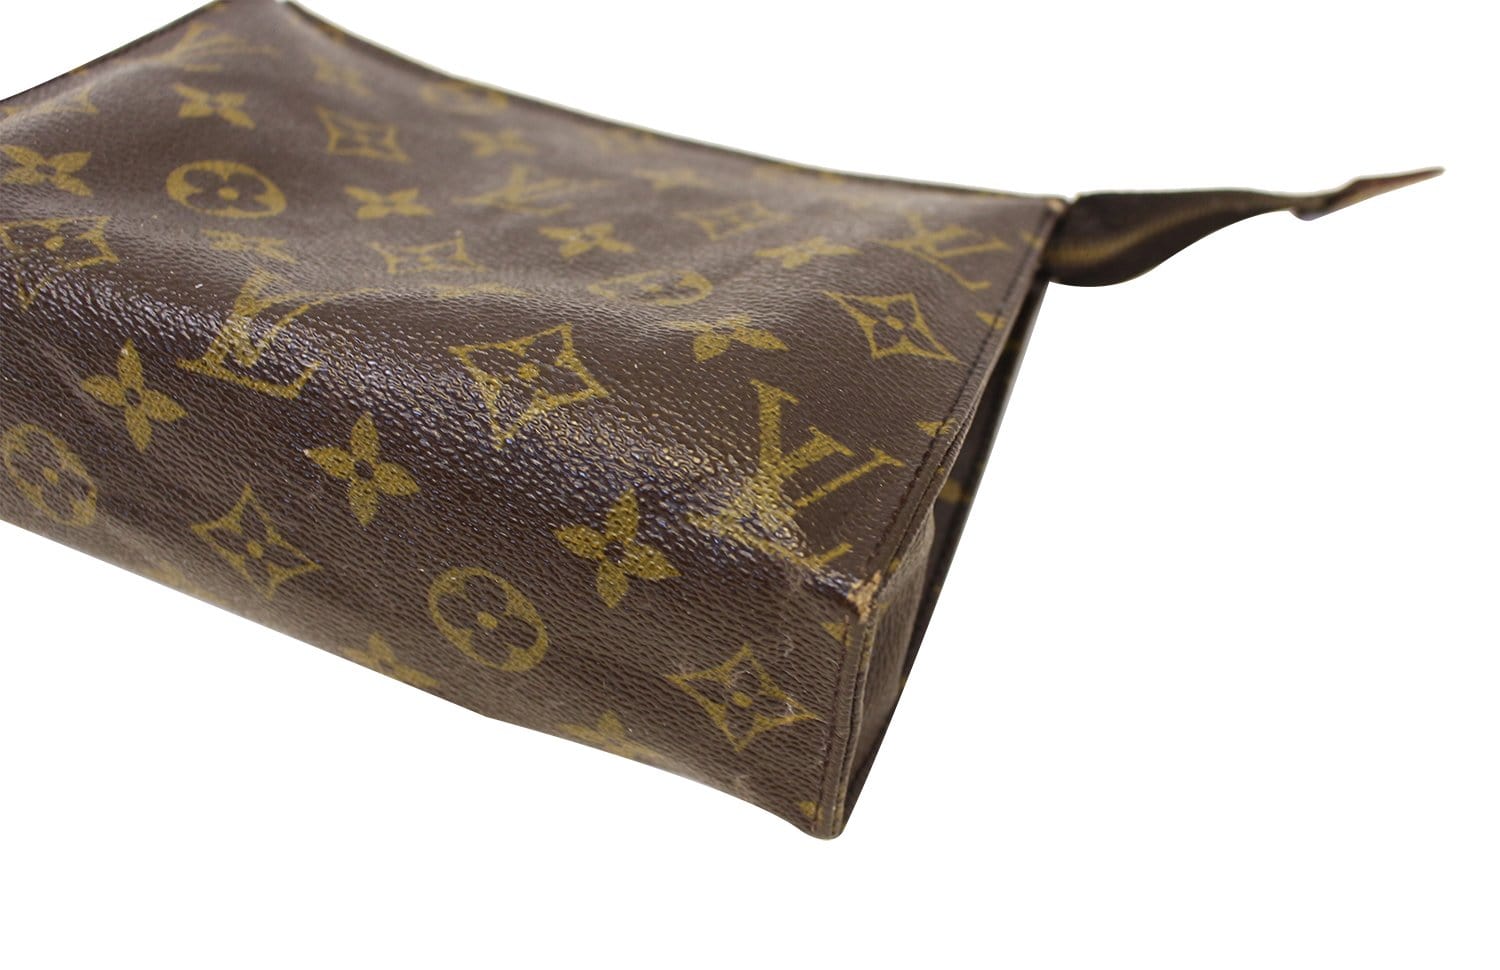 Authentic LOUIS VUITTON Toiletry Pouch 19 Monogram M47544 **FREE SHIPPING**